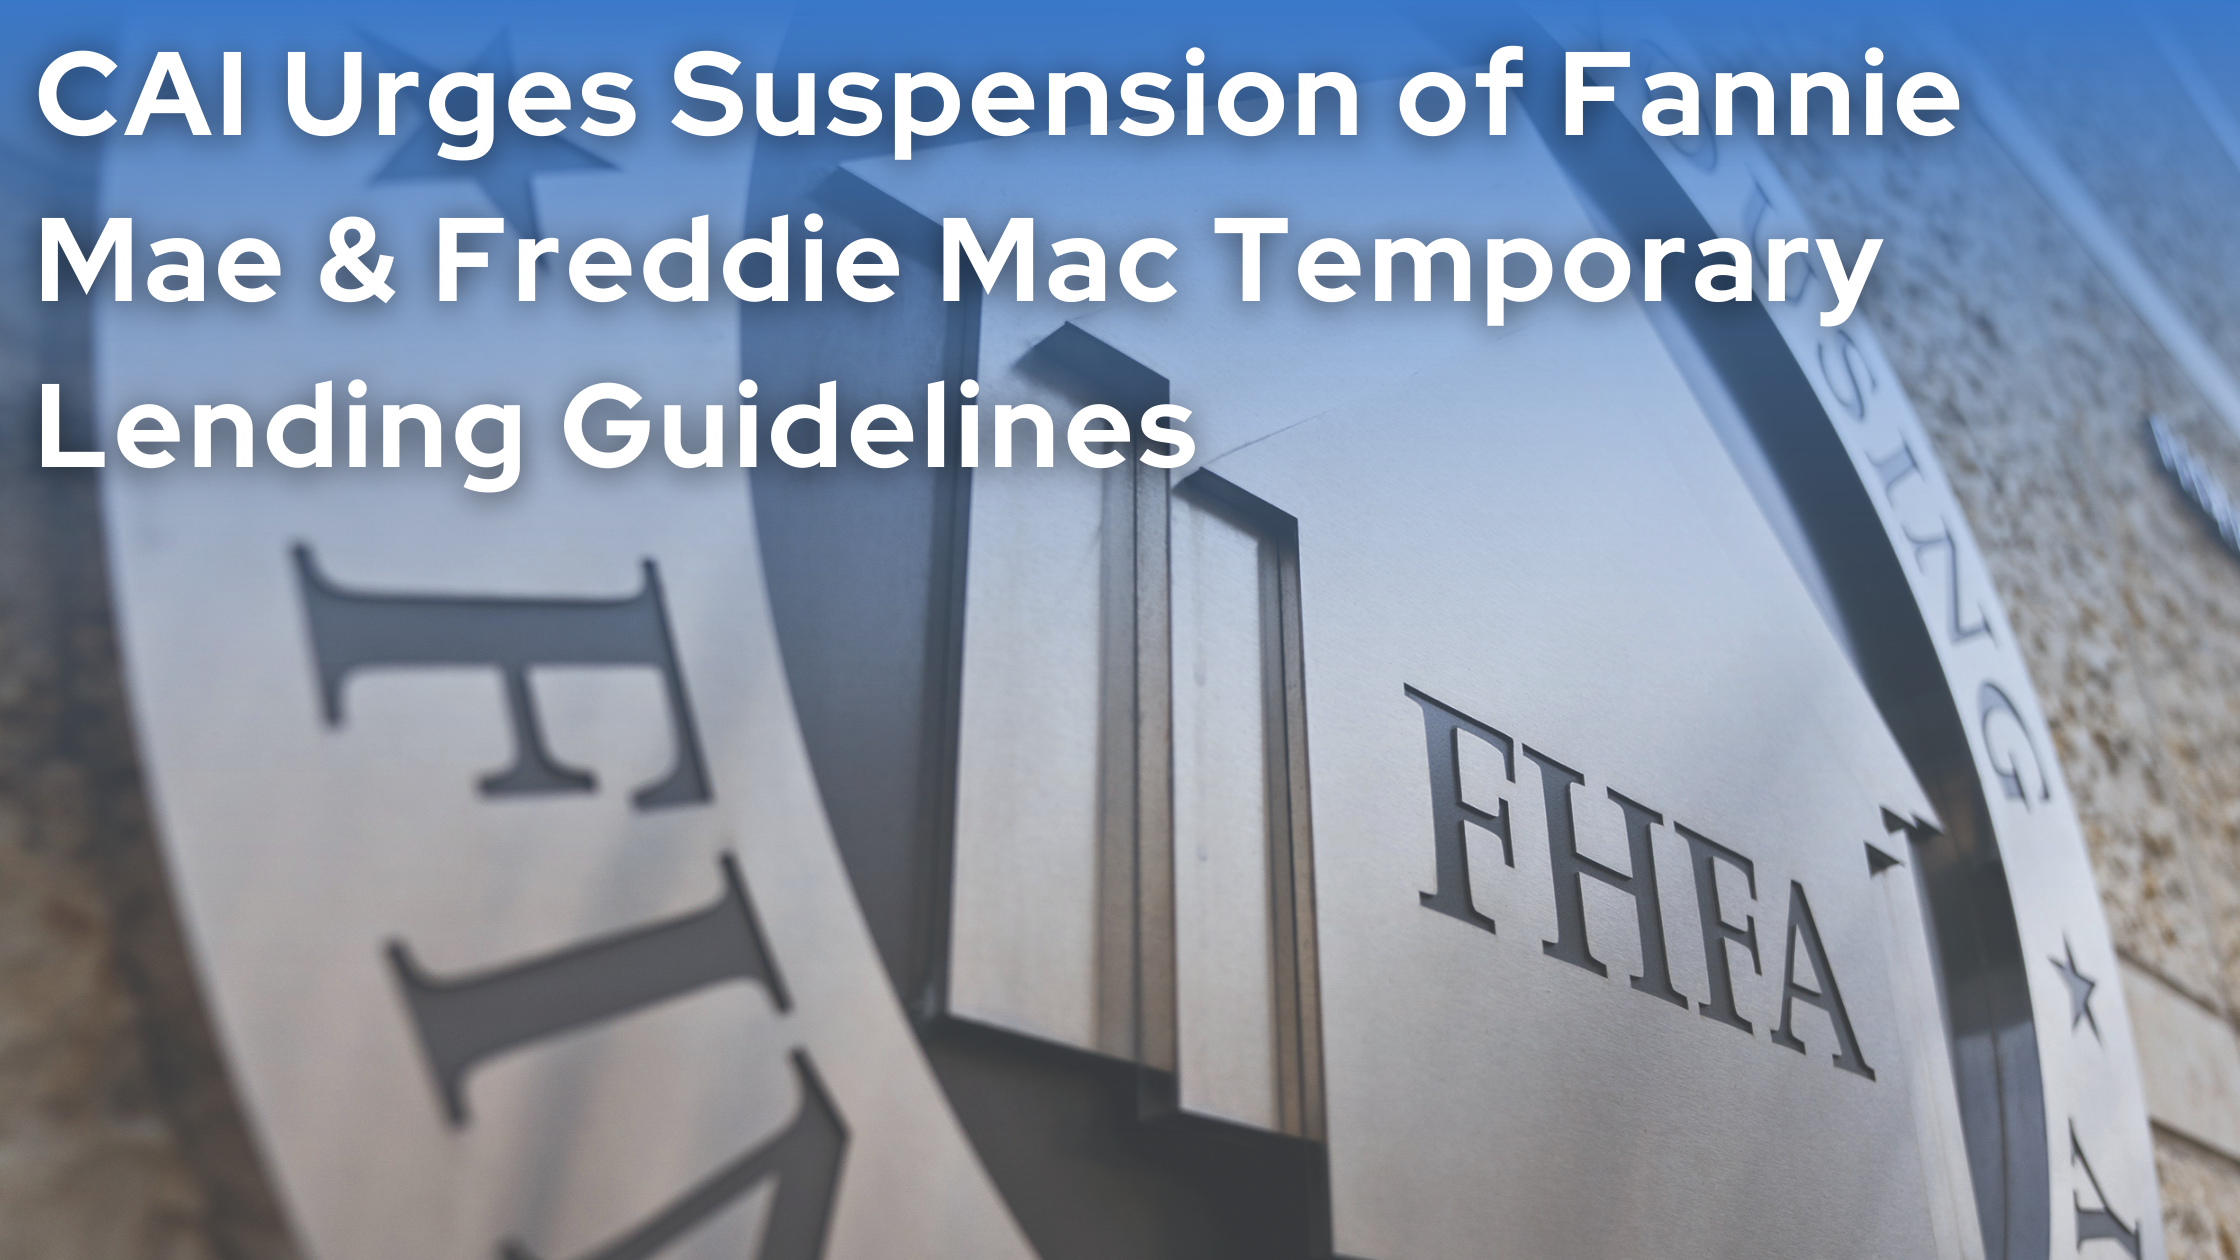 CAI Urges Suspension of Fannie Mae and Freddie Mac Temporary Lending Guidelines for Condominiums and Cooperatives